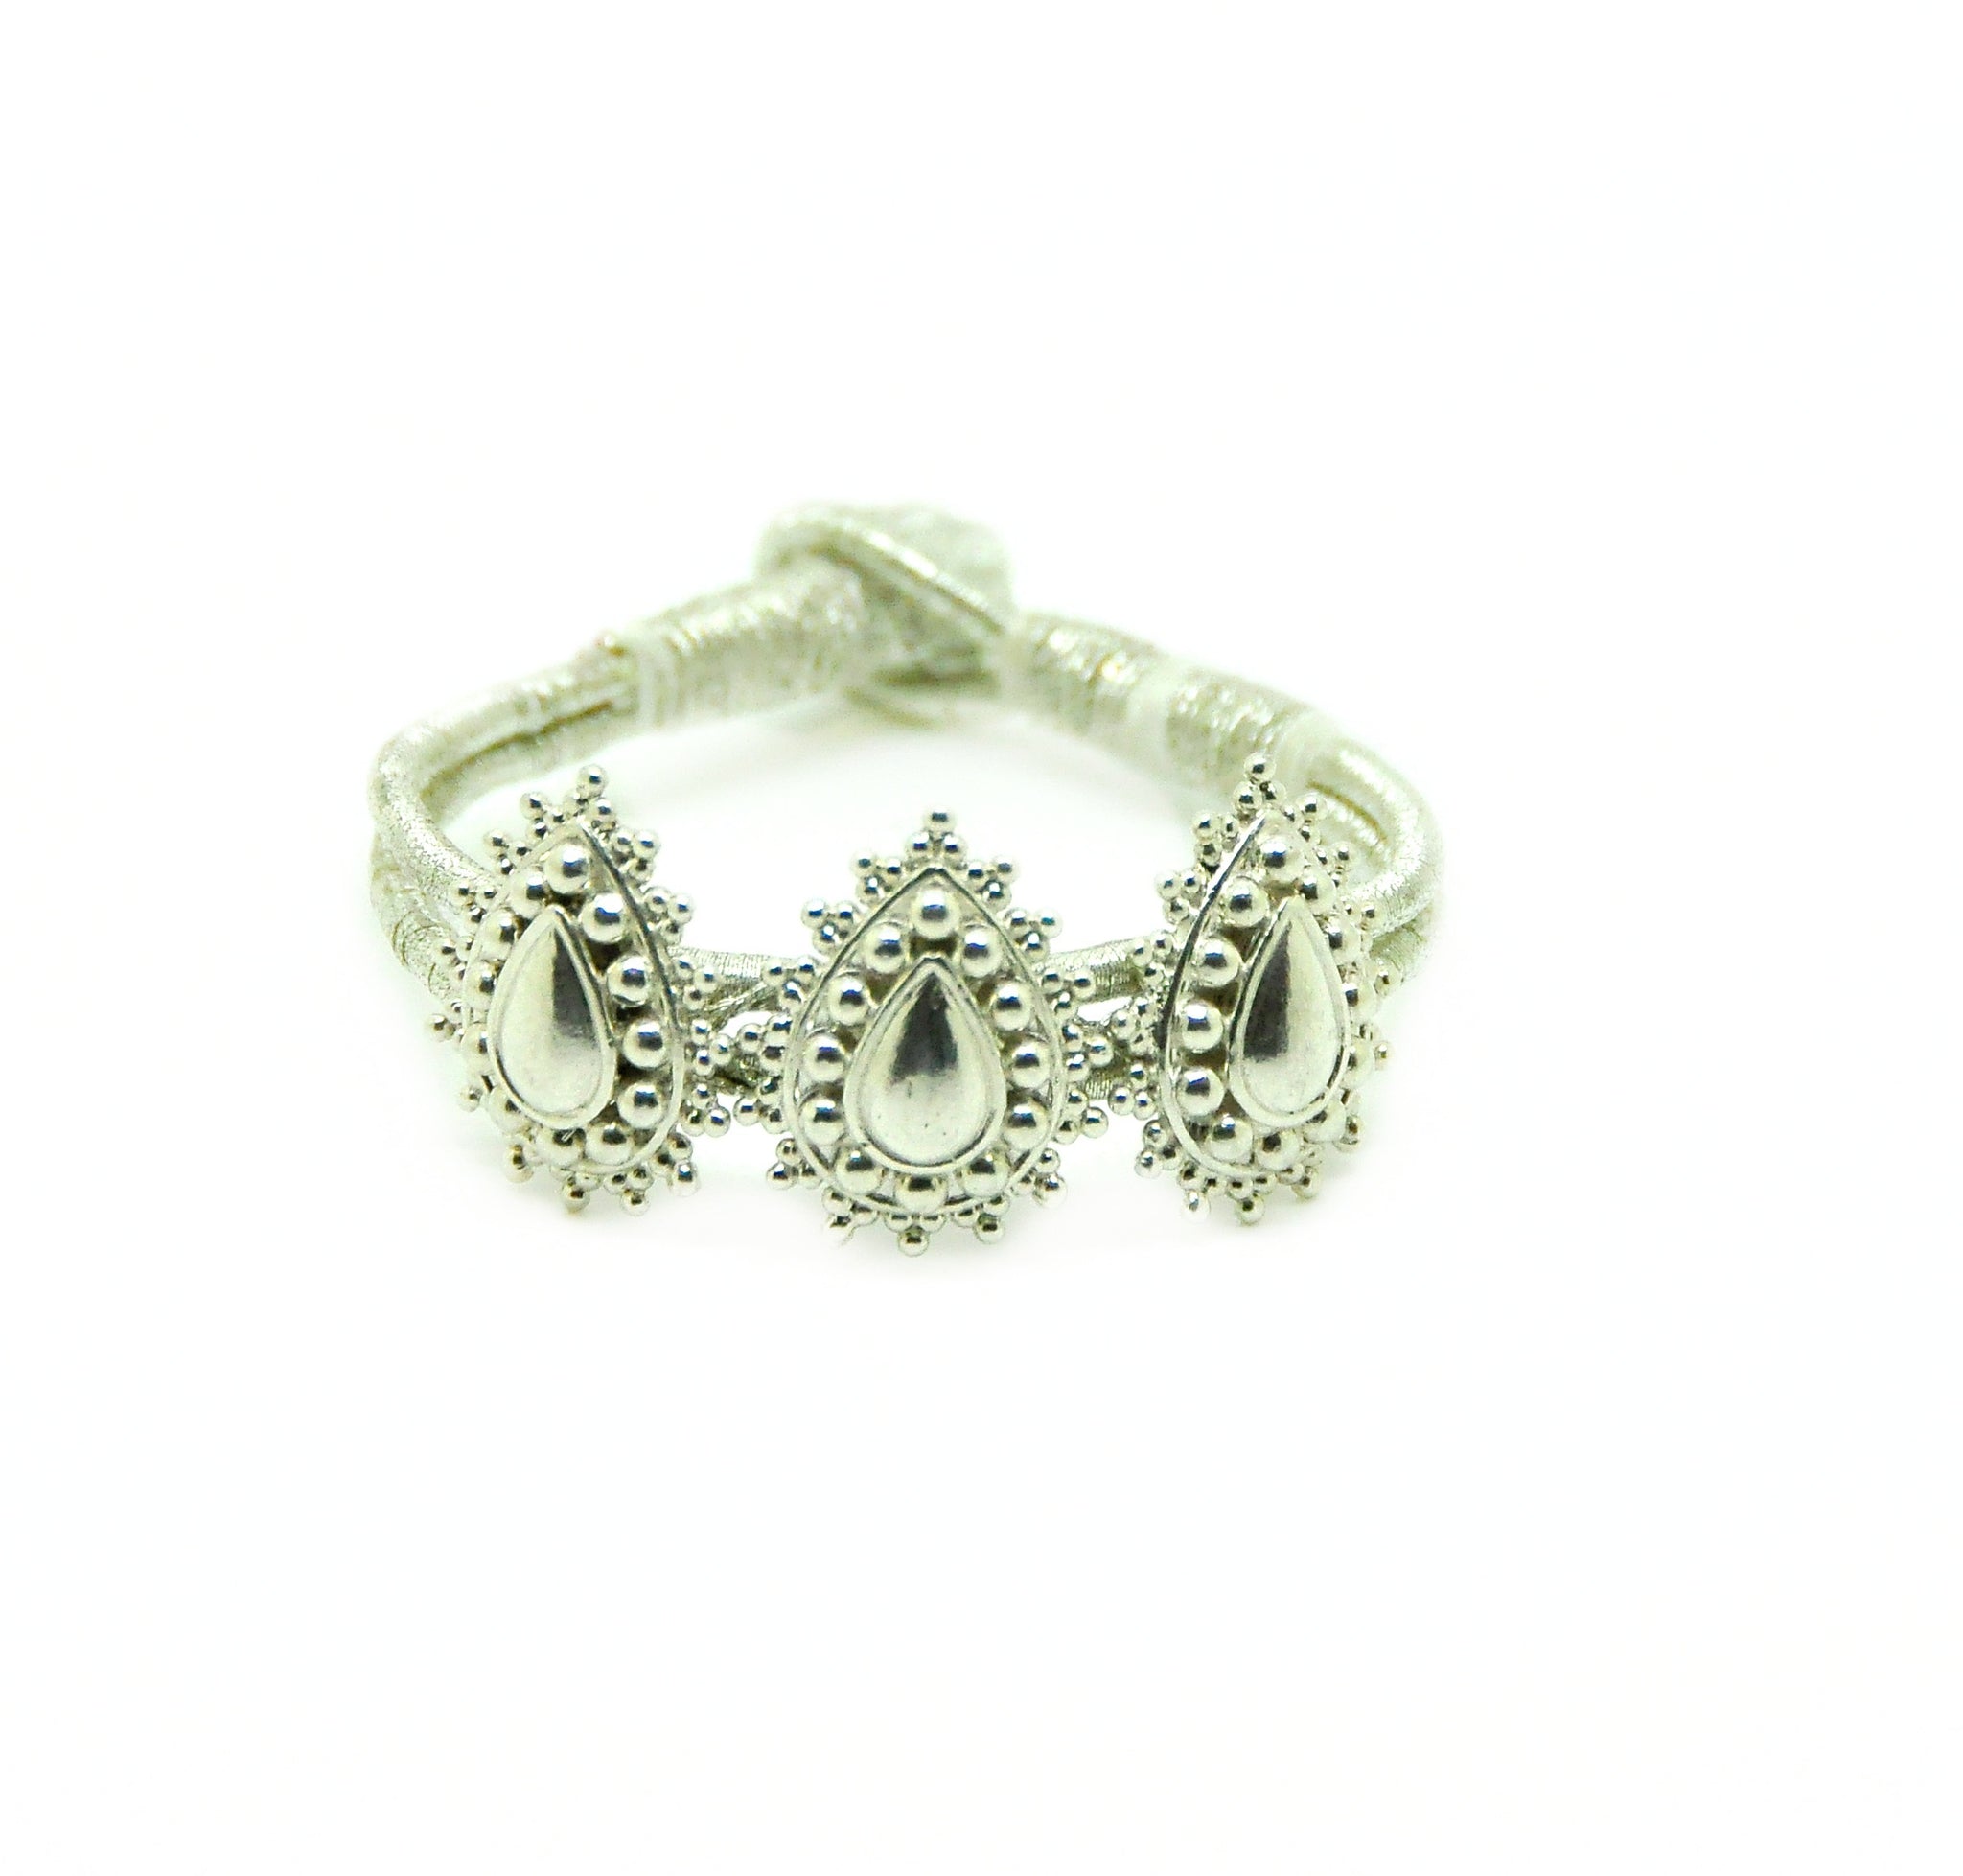 SOLD - ON SALE (Clearance) Pochi Bracelet - Marquise 2